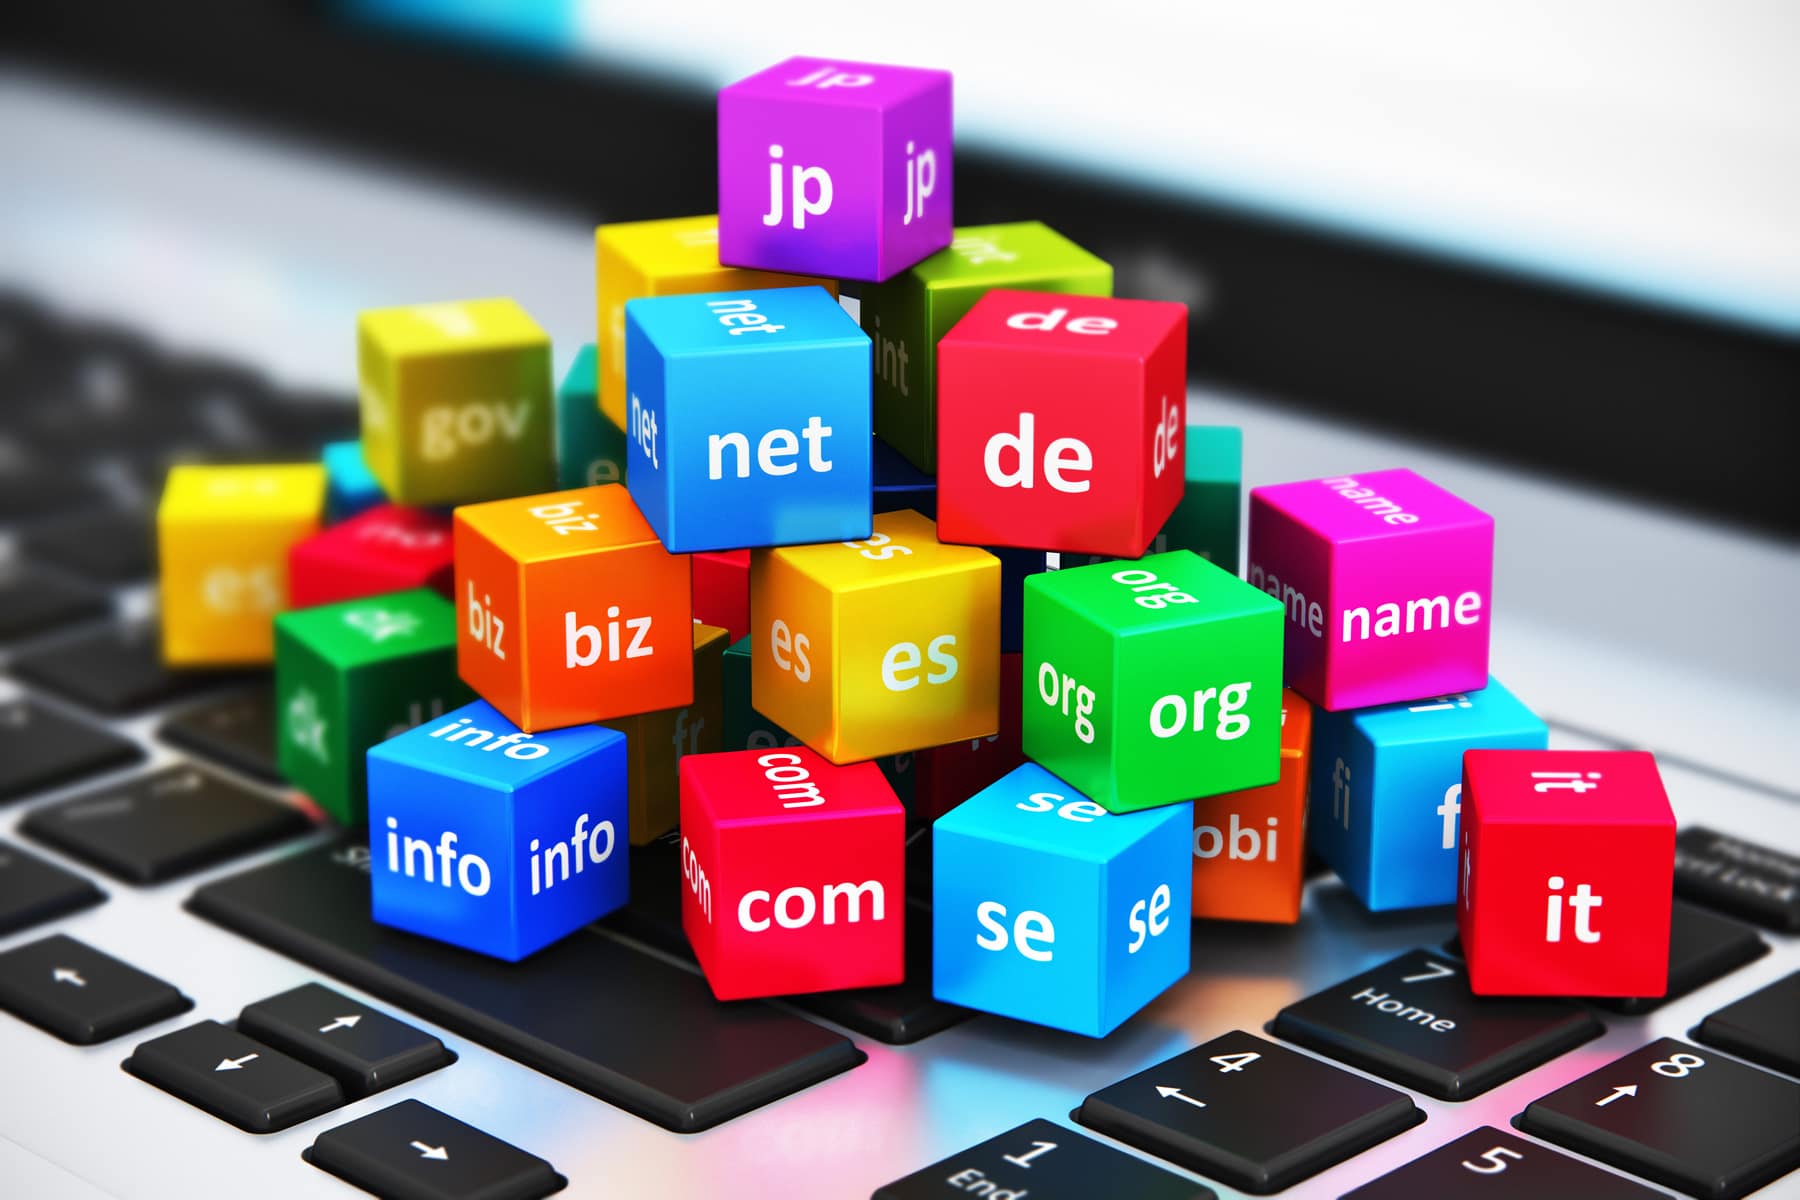 Picking the right domain name for your company